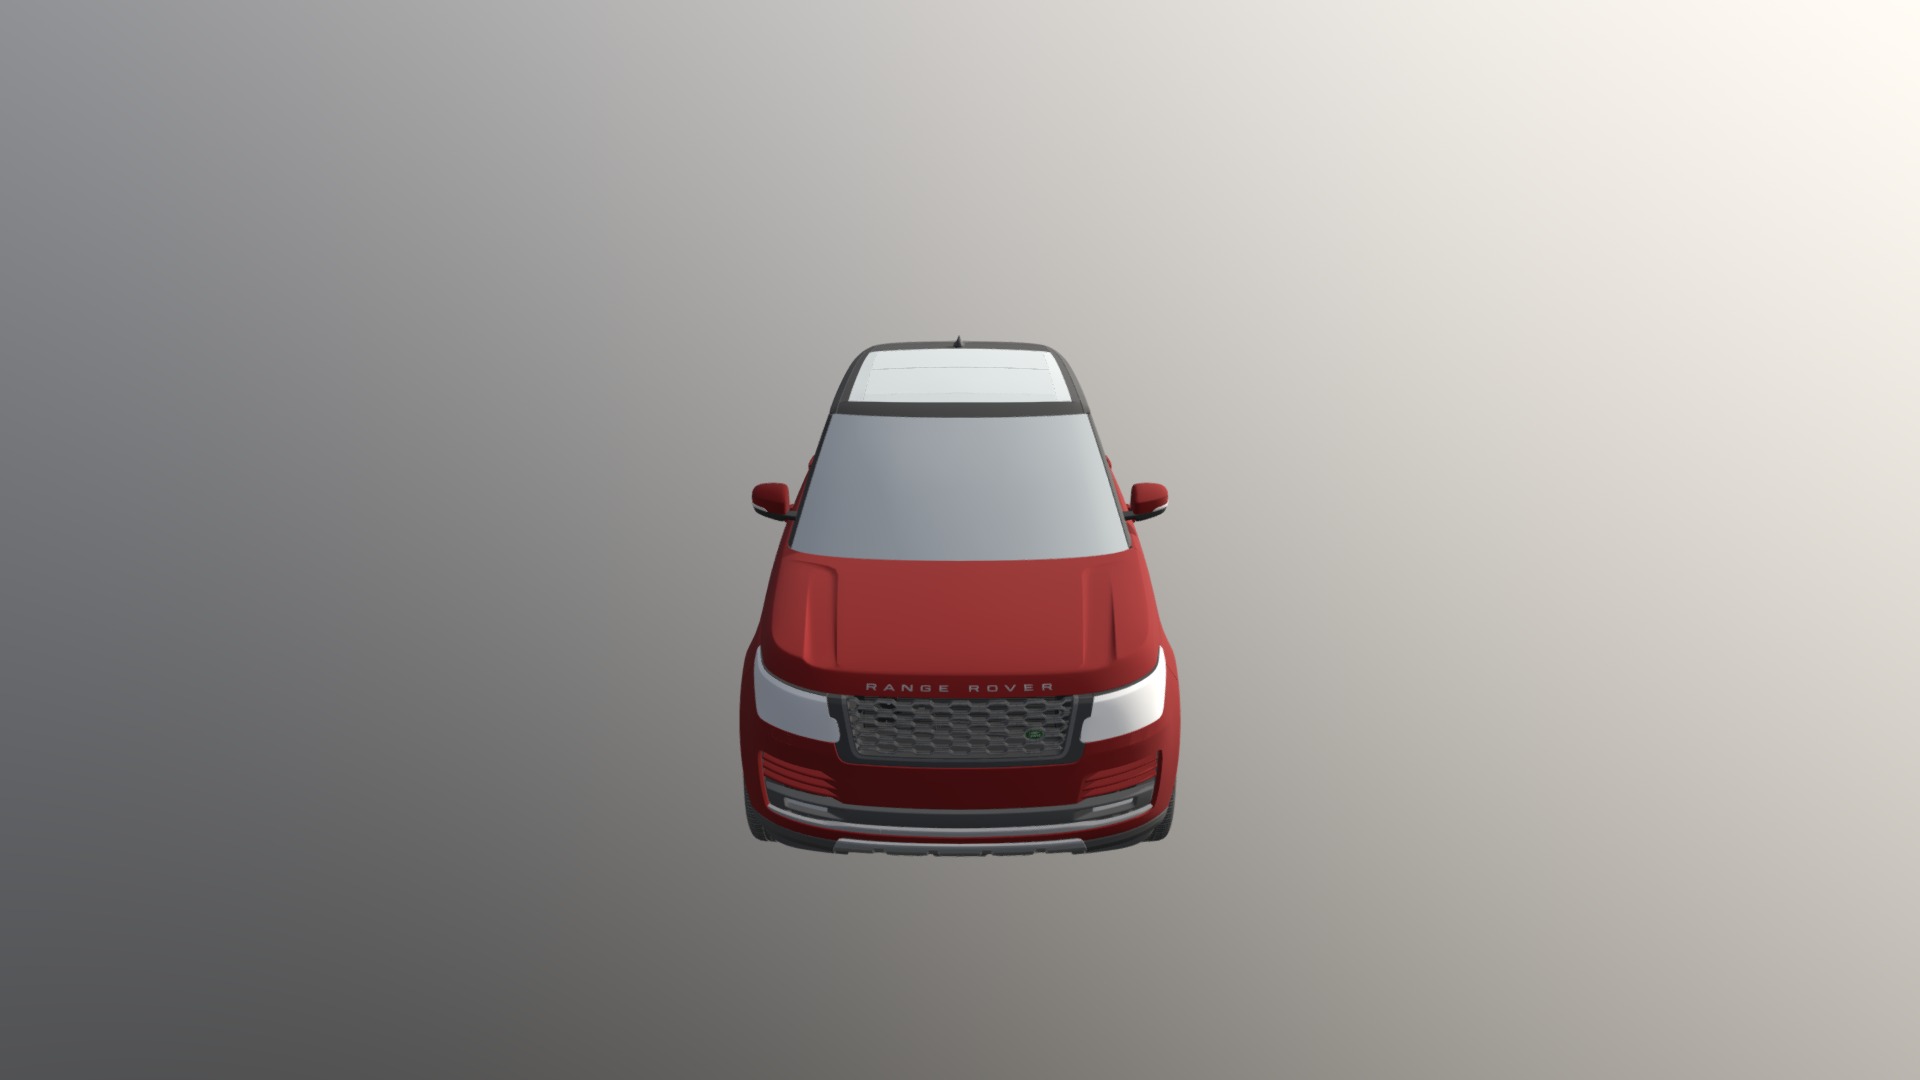 3D model Range Rover Hybrid L405 2018 Fbx - This is a 3D model of the Range Rover Hybrid L405 2018 Fbx. The 3D model is about a red car on a white background.